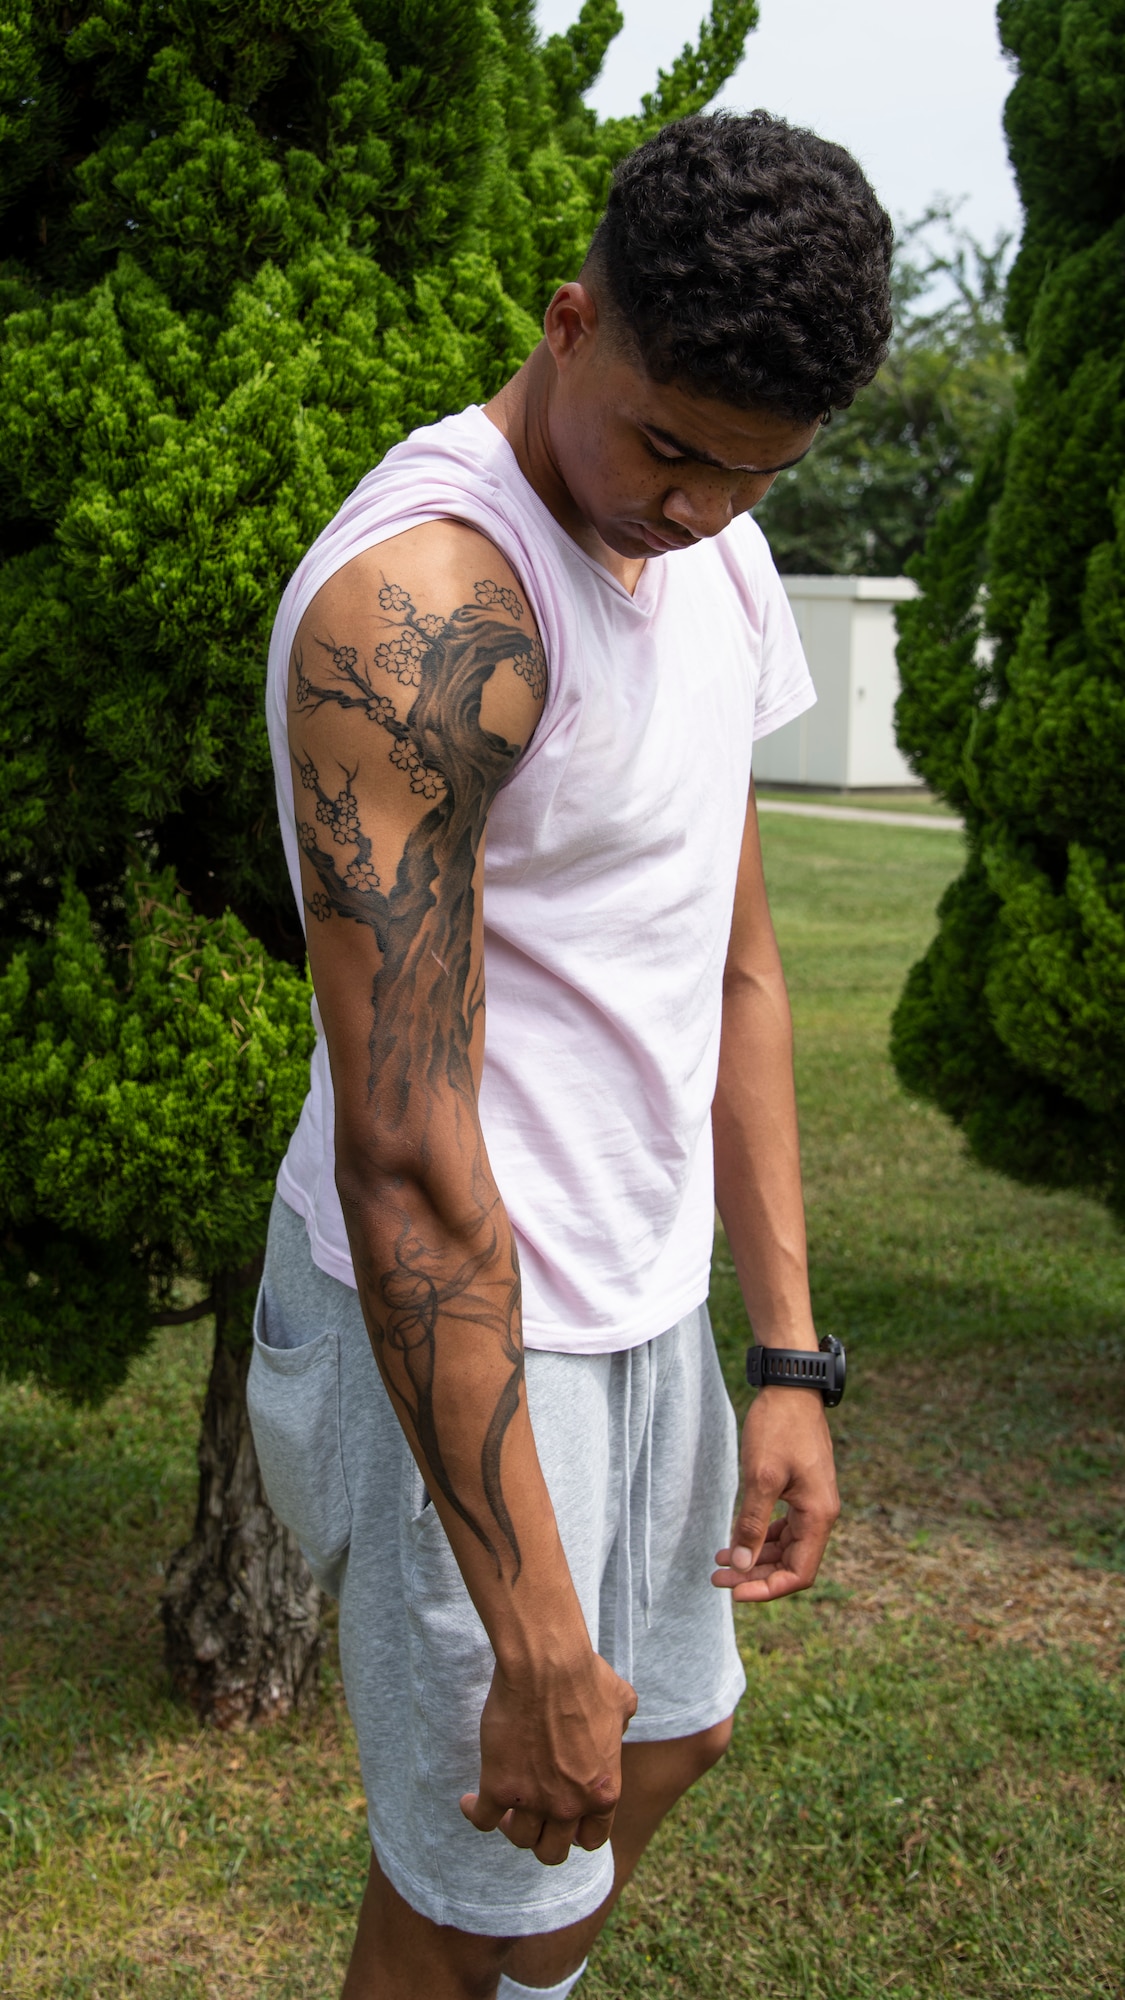 U.S. Air Force Airman 1st Class D’Andre Daniels, a 35th Aircraft Maintenance Squadron crew chief, reveals his tattoos at Misawa Air Base, Japan, Aug. 8, 2019. For this one individual in particular, his tattoos are a reminder of where he used to be, where he never wants to be again and where he needs to go. (U.S. Air Force photo by Airman 1st China M. Shock)